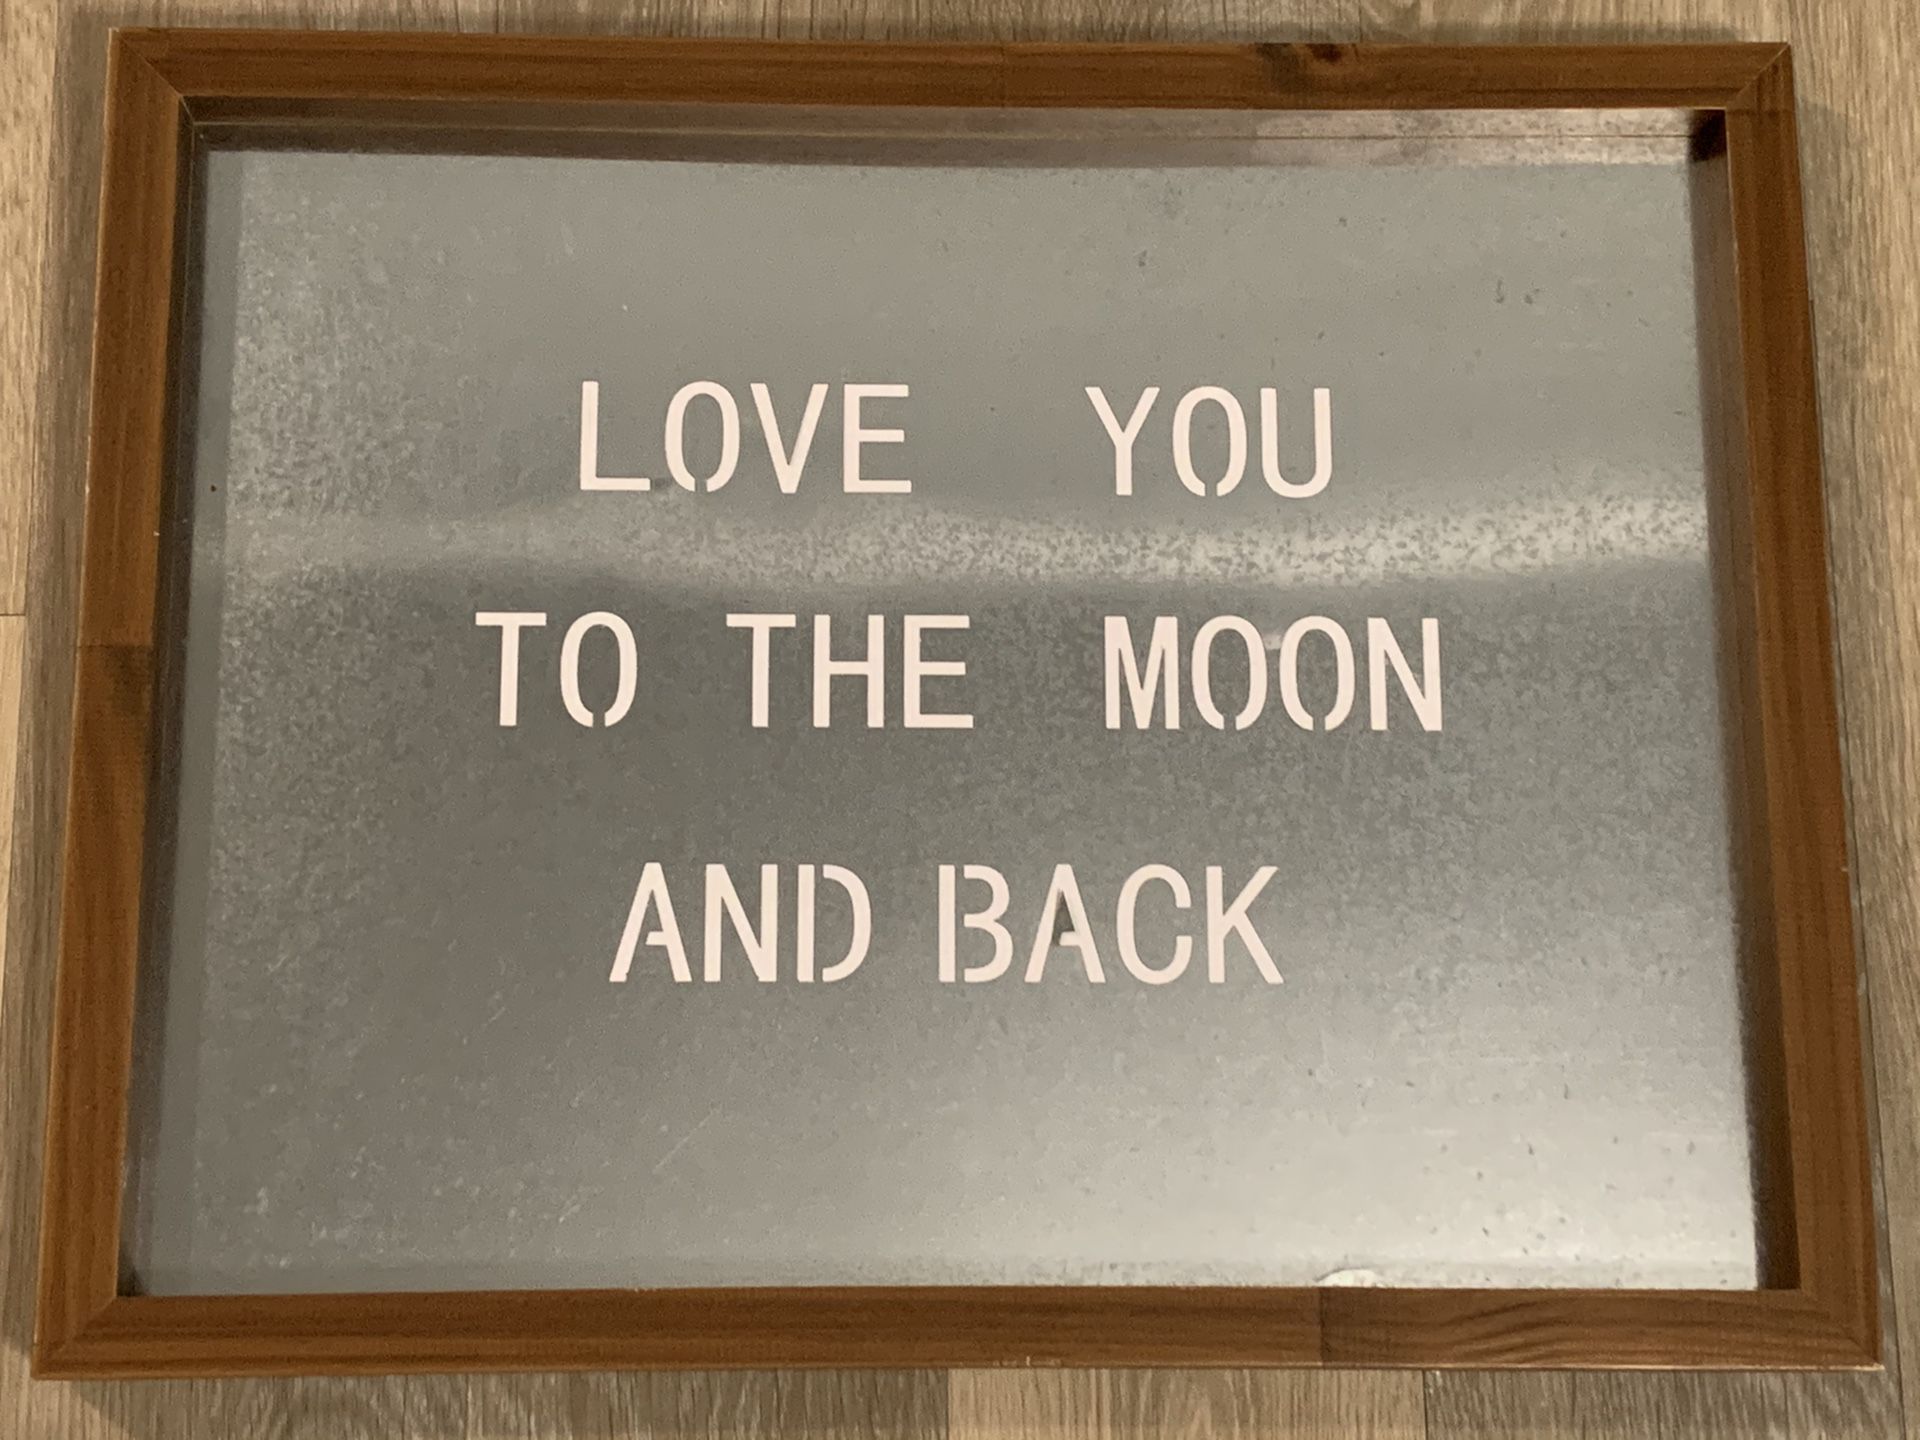 “Love You To The Moon And Back” Metal and Wood Frame